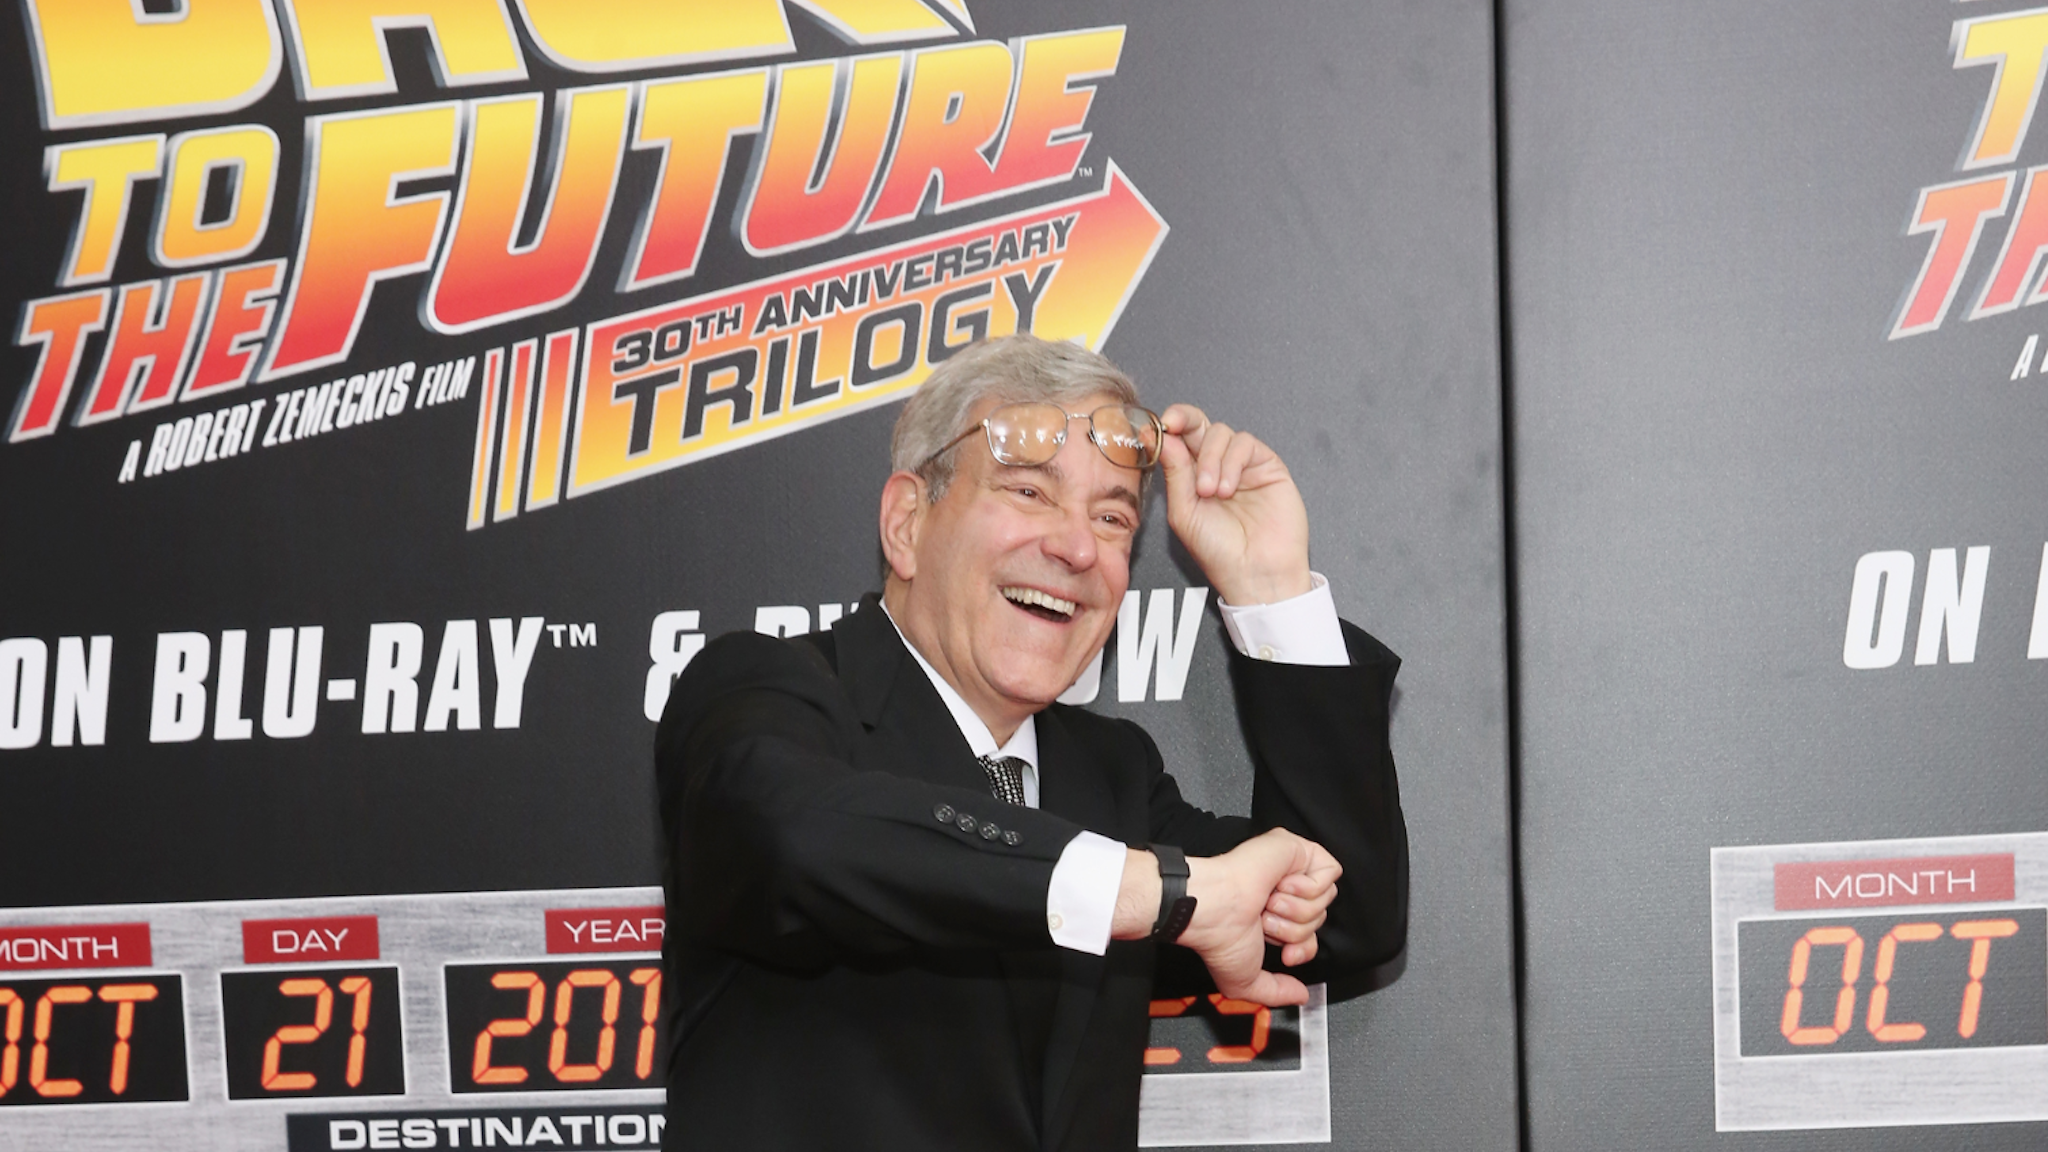 NEW YORK, NY - OCTOBER 21: Franchise co-creator, writer and producer Bob Gale attends "Back To The Future" New York Special Anniversary screening at AMC Loews Lincoln Square on October 21, 2015 in New York City.